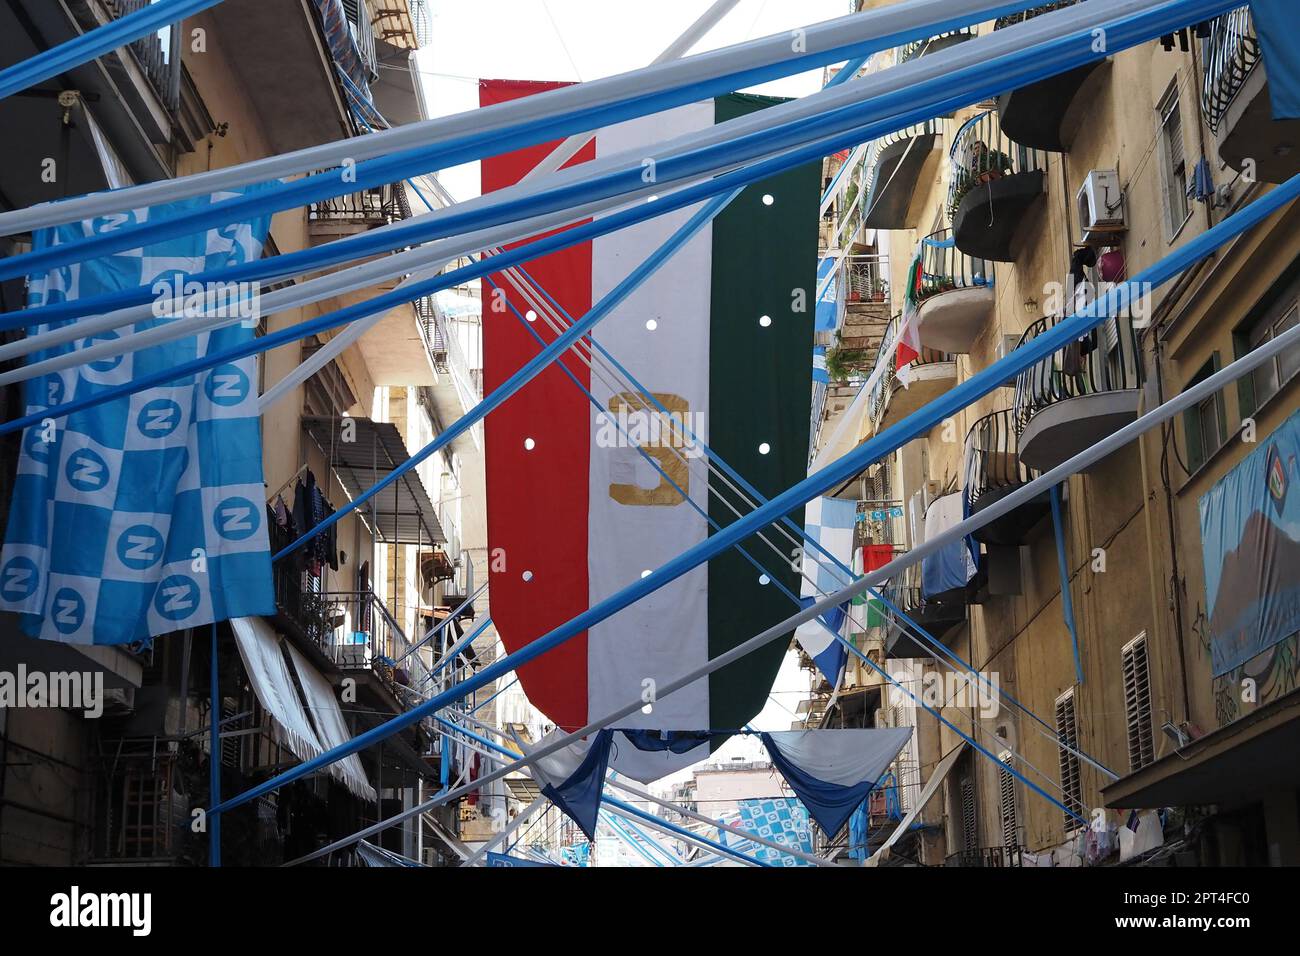 Napoli, Italy. 27th Apr, 2023. Flags and banners in honor of Napoli displayed in the alleys of Forcella, during the preparations for the celebration of the victory of the Italian Serie A championship and the third scudetto 'shield with the colors of the Italian flag, which is worn on the game uniform by the team that won the championship in the previous season'. Credit: Vincenzo Izzo/Alamy Live News Stock Photo